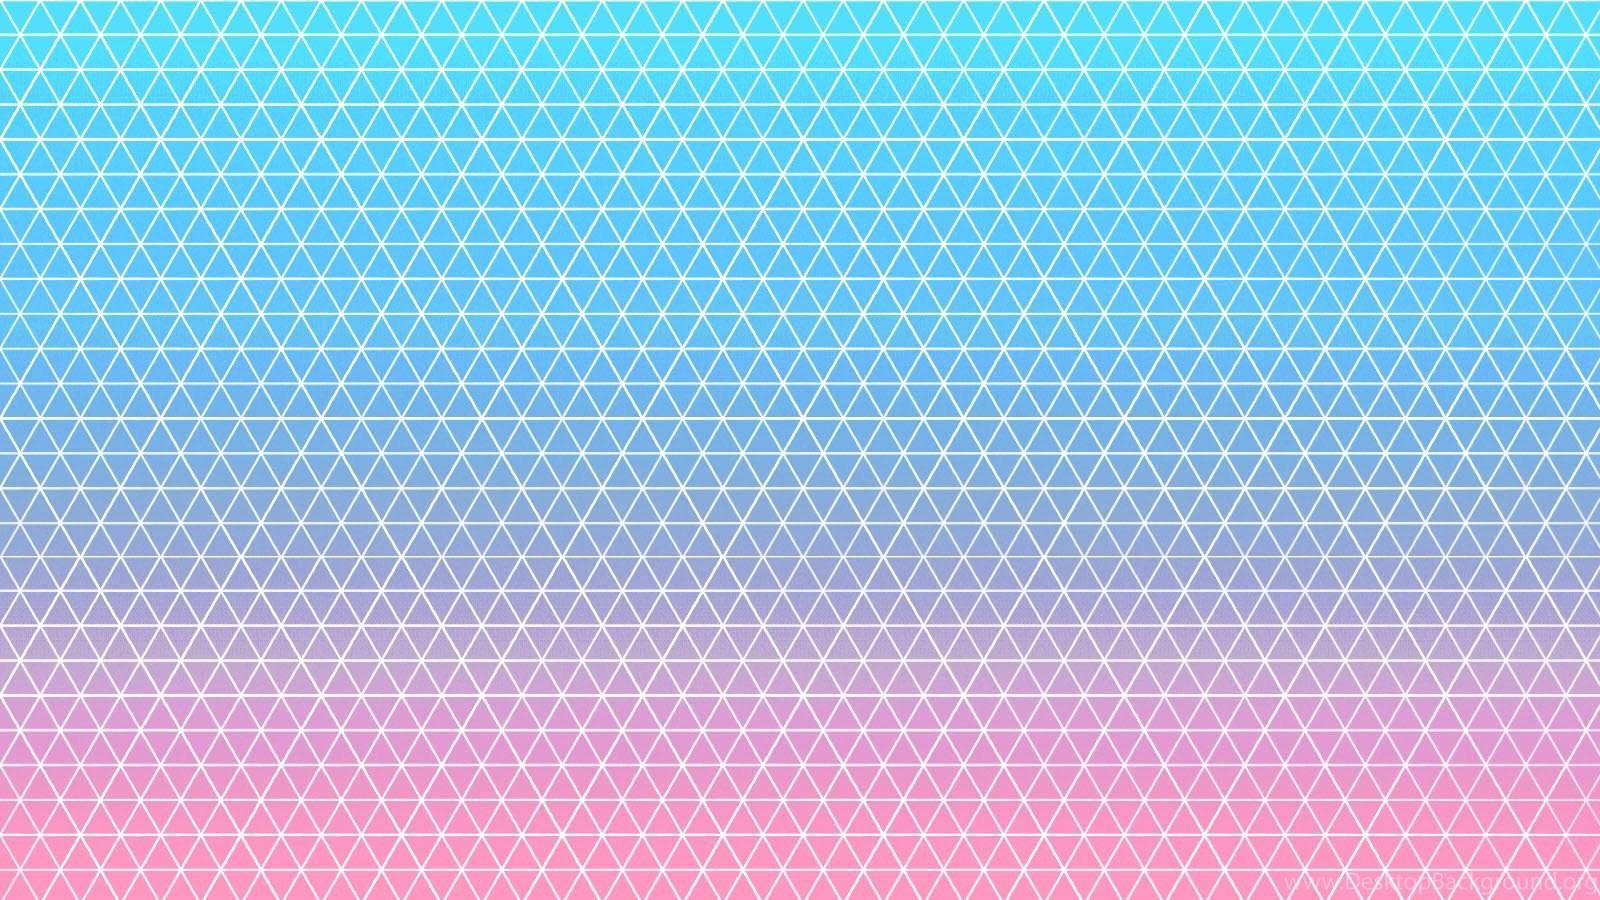 Triangular Grid Aesthetic Teal Pink Gradient Background